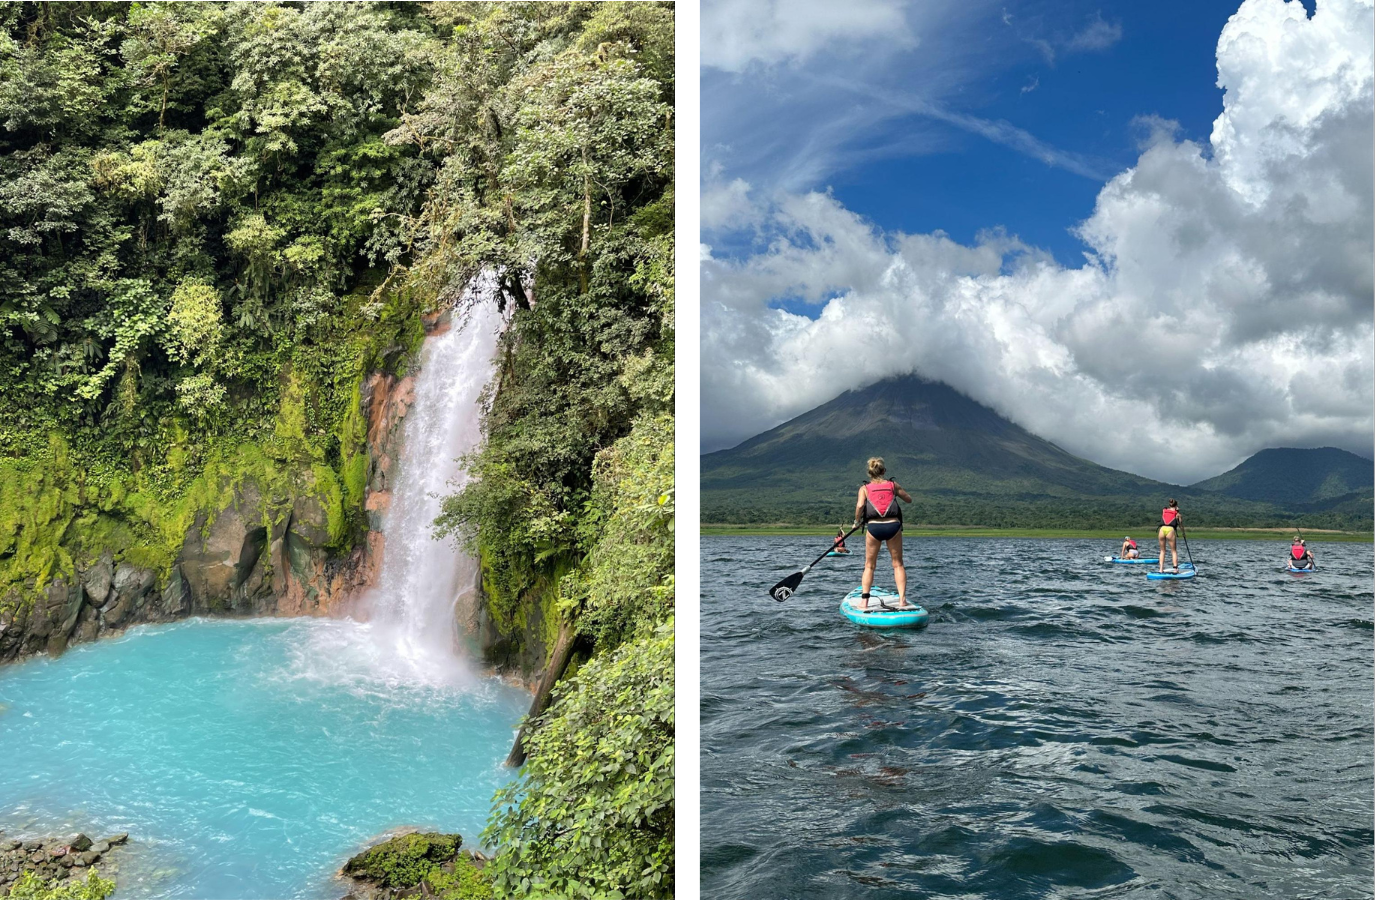 photo-of-rio-celeste-cerulean-blue-on-left-paddleboarding-at-lake-arenal-arenal-volcano-on-right-image